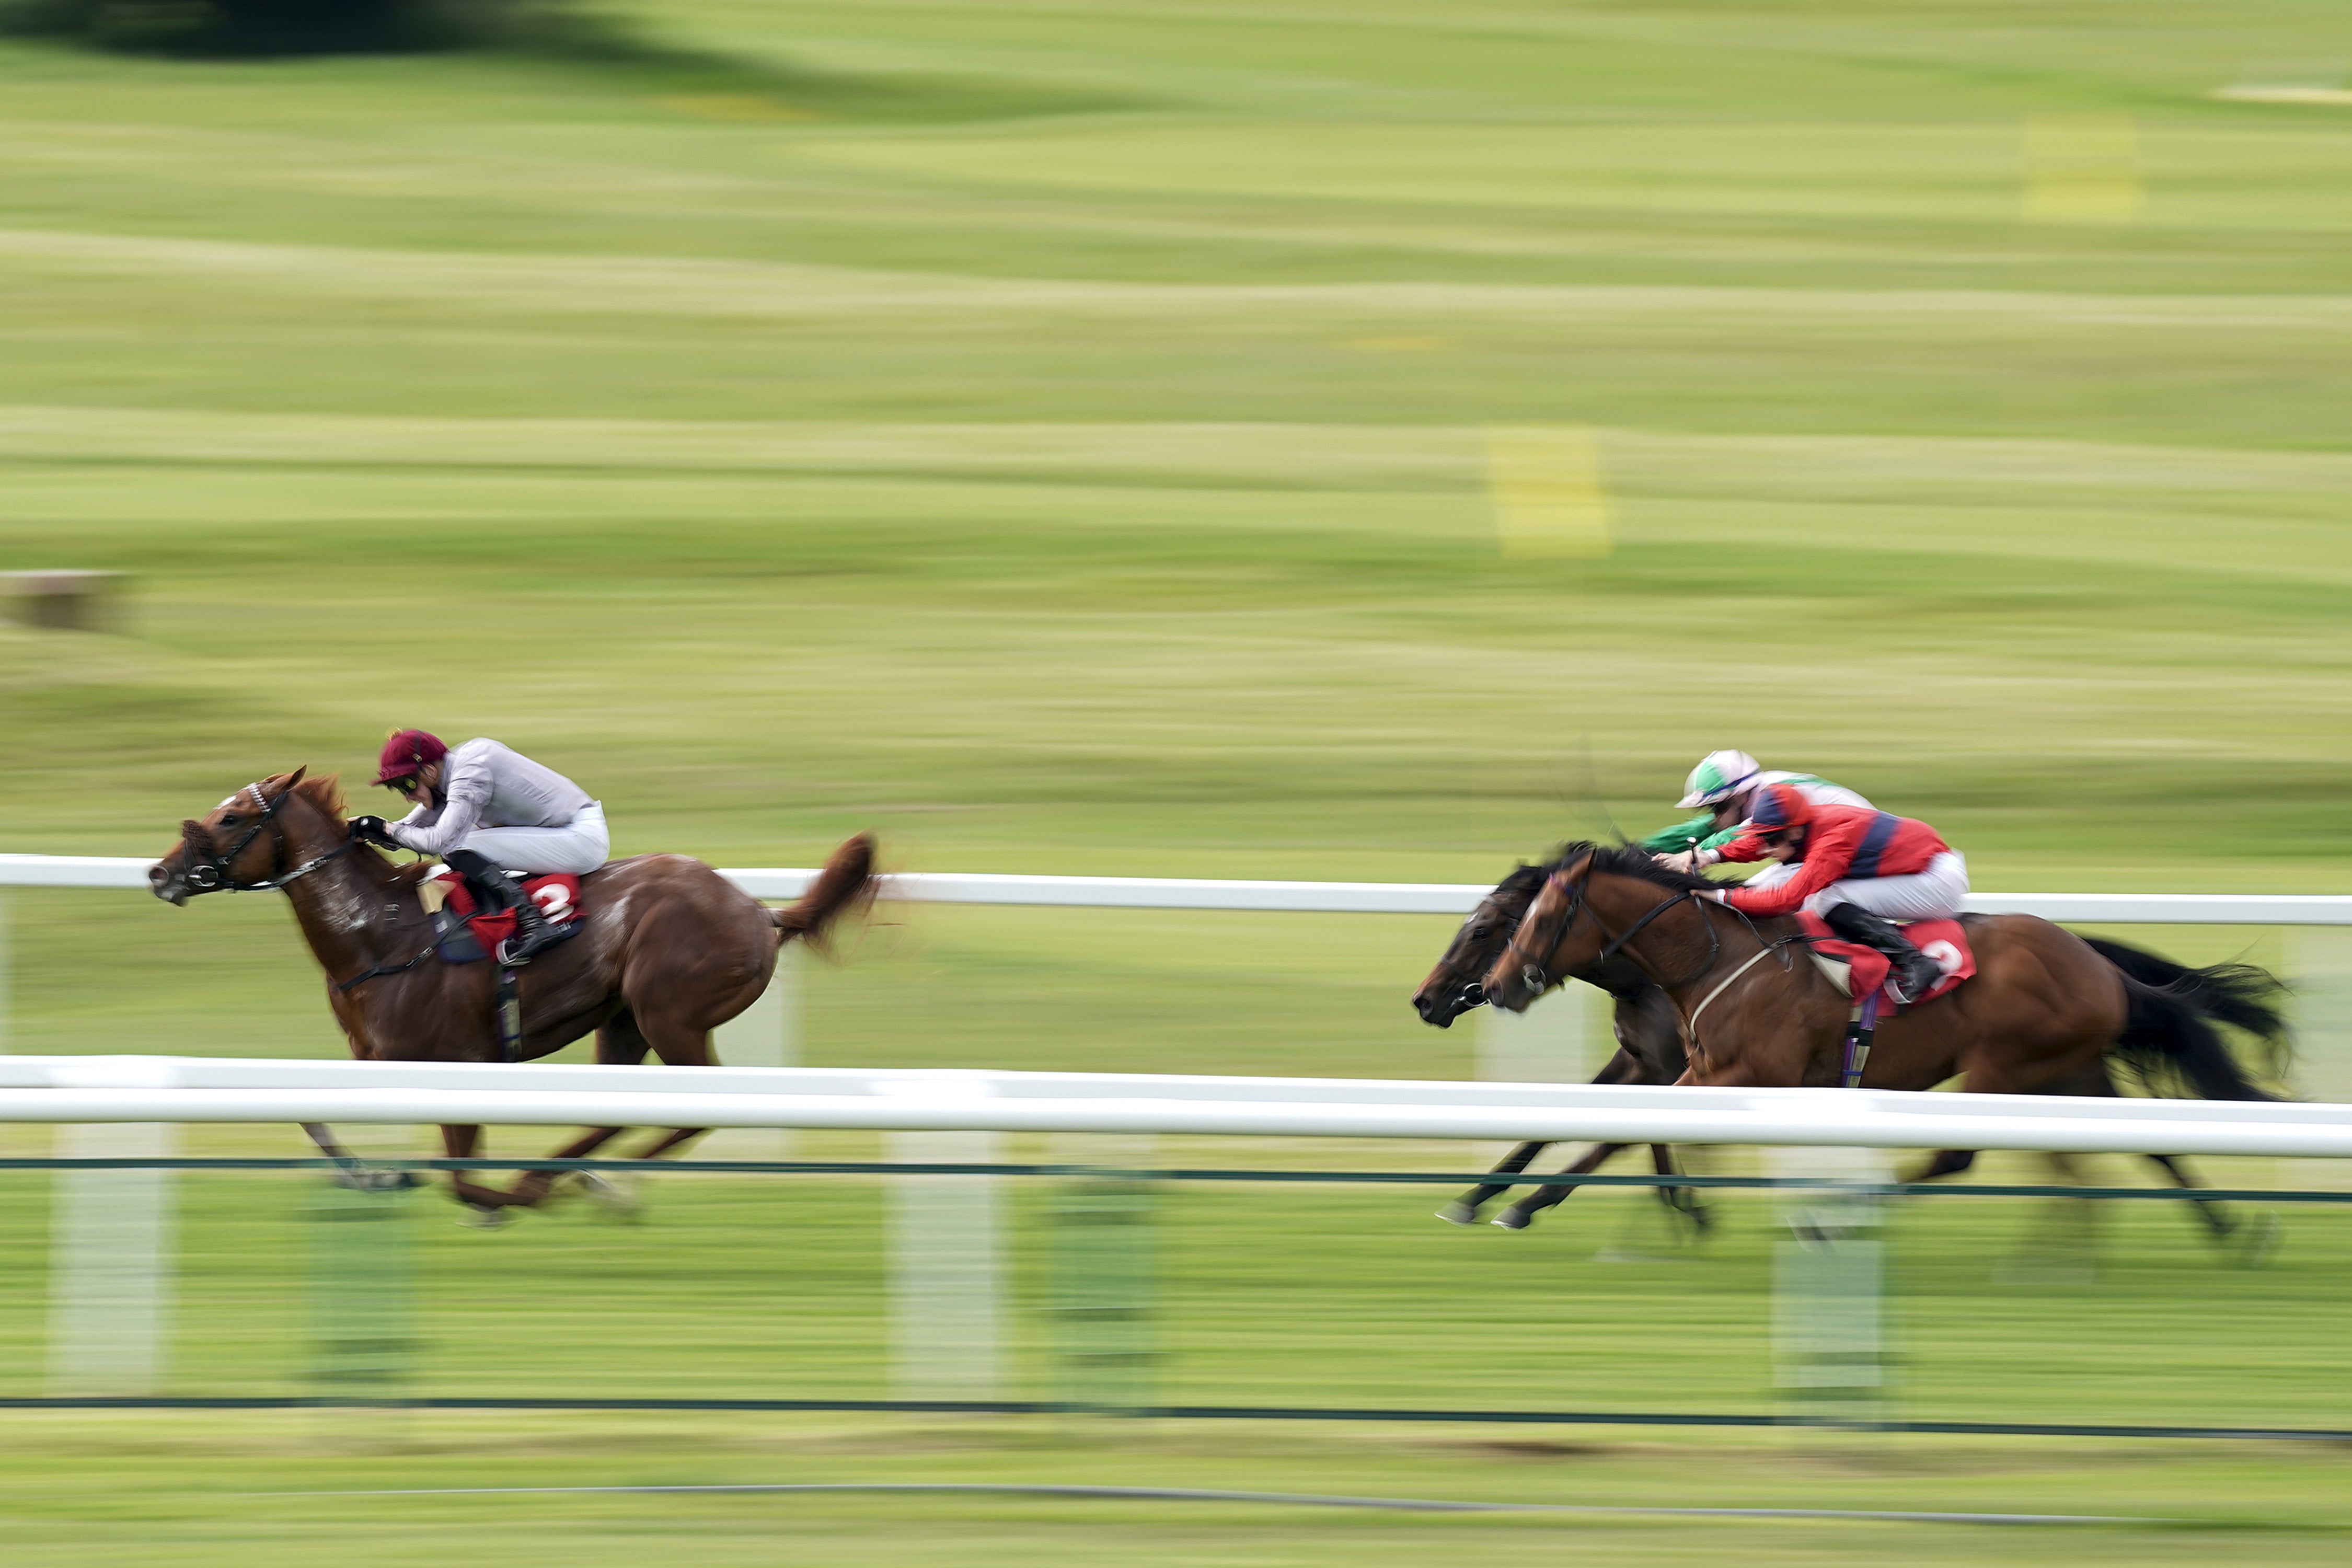 James Doyle riding Ebro River (left) coming home to win The Coral ‘Beaten By A Length’ National Stakes at Sandown Park Racecourse